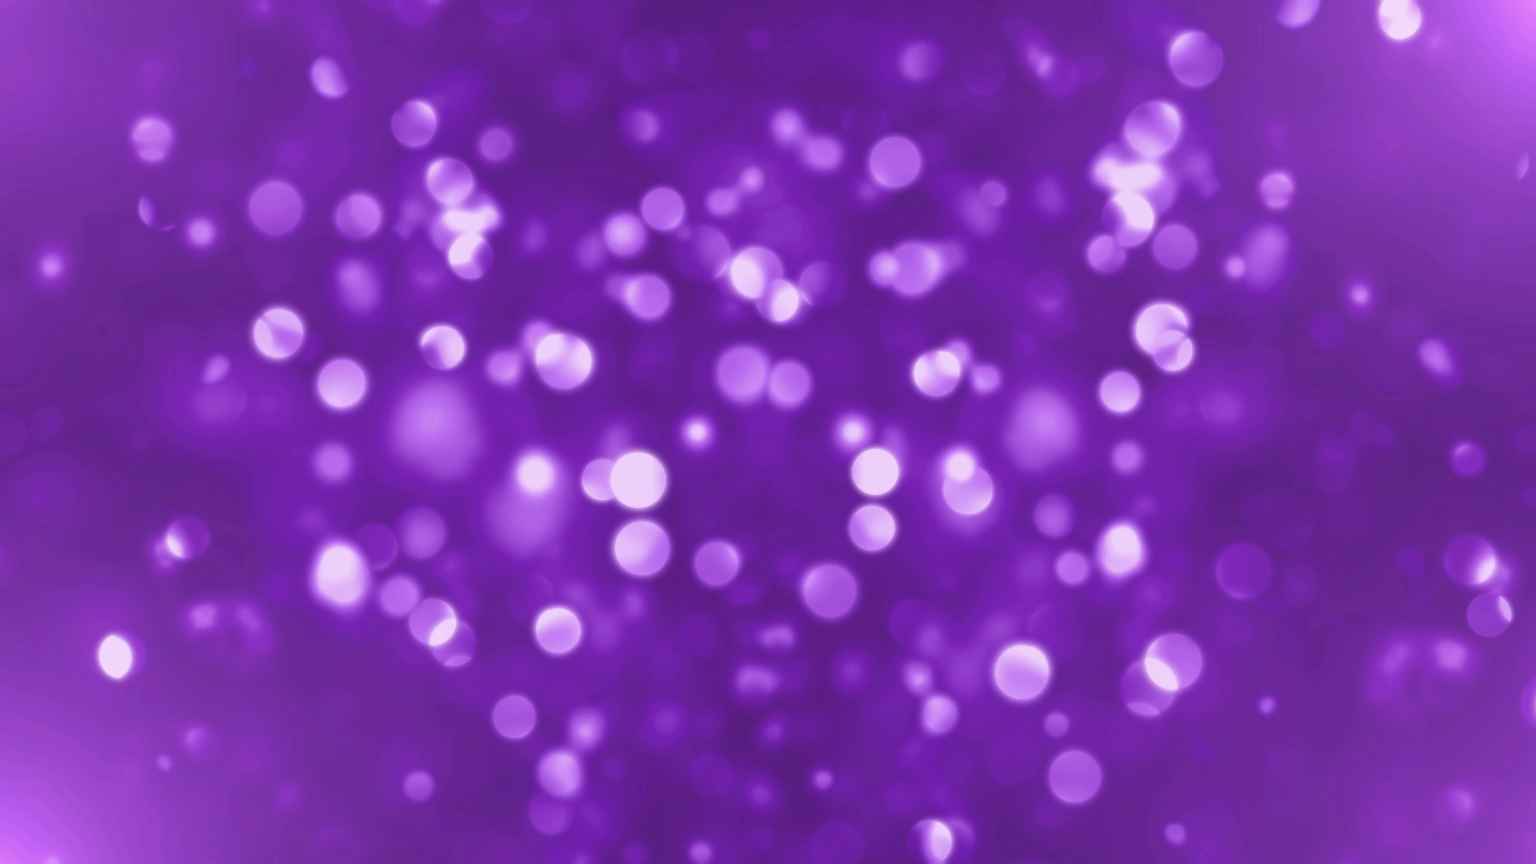 4K Beautiful Purple Particles Looped Motion Background || VFX Free To Use 4K Screensaver